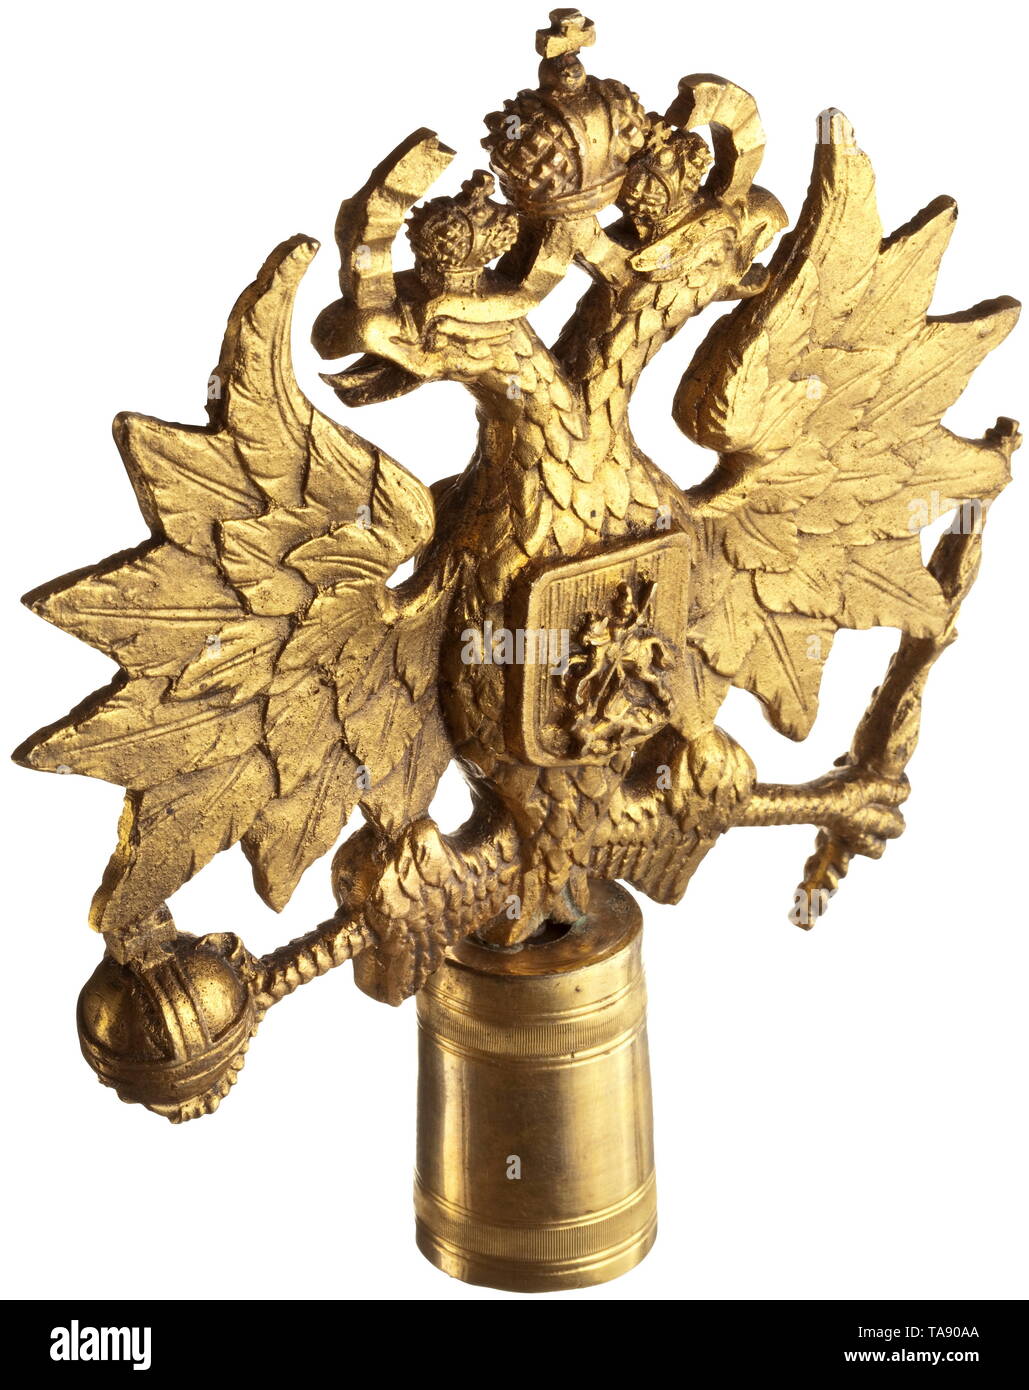 A Russian double-headed eagle top, probably for the tsar's pages, circa 1900 Gilded bronze. Delicately chased and engraved Russian double-headed eagle on the front. Height 18 cm. Good, used condition. Rare. historic, historical, 20th century, Additional-Rights-Clearance-Info-Not-Available Stock Photo